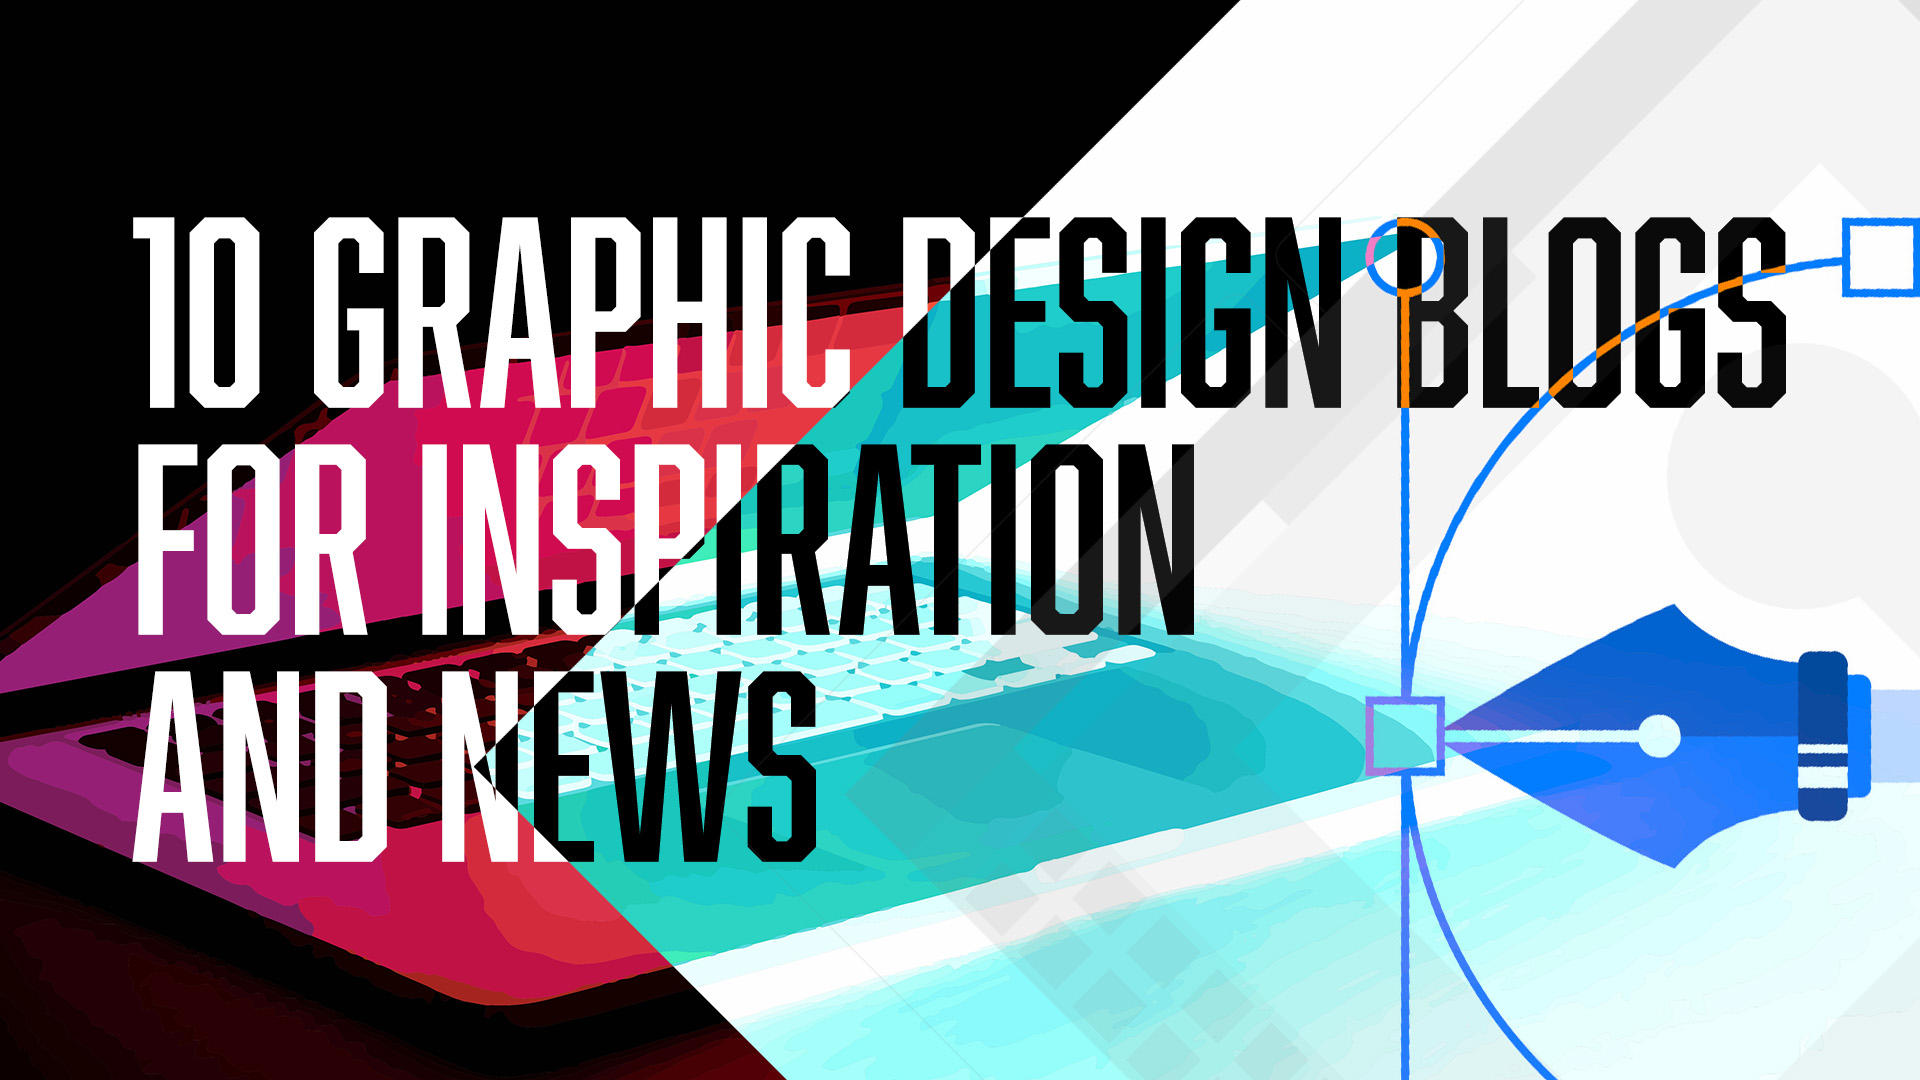 10 Design Blogs for Inspiration and News